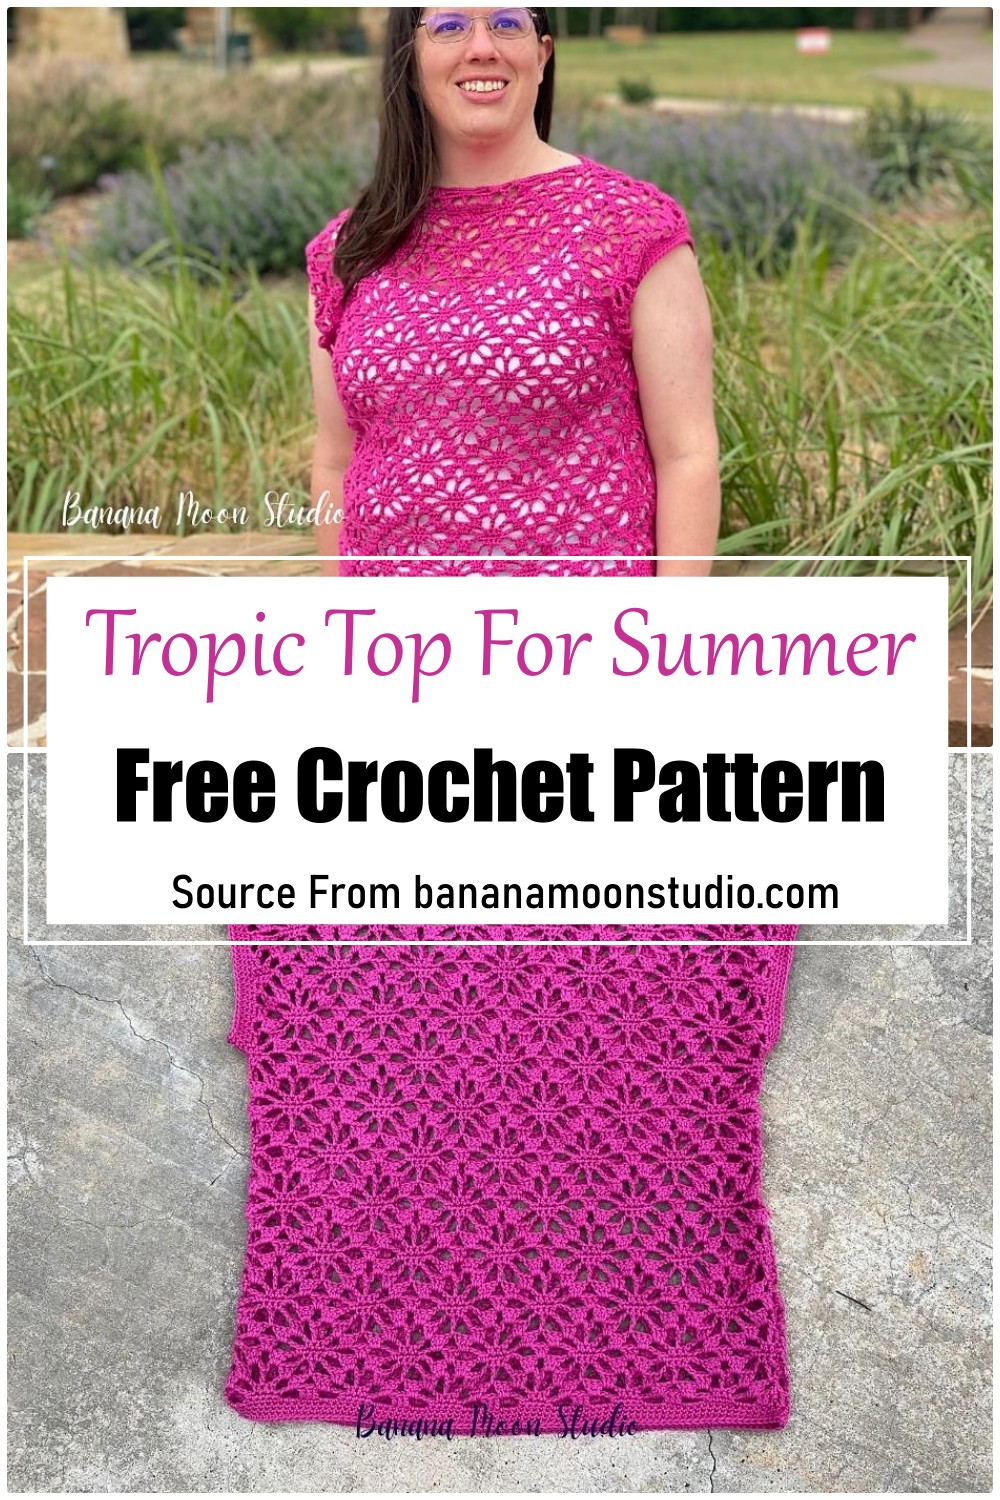 Tropic Top For Summer